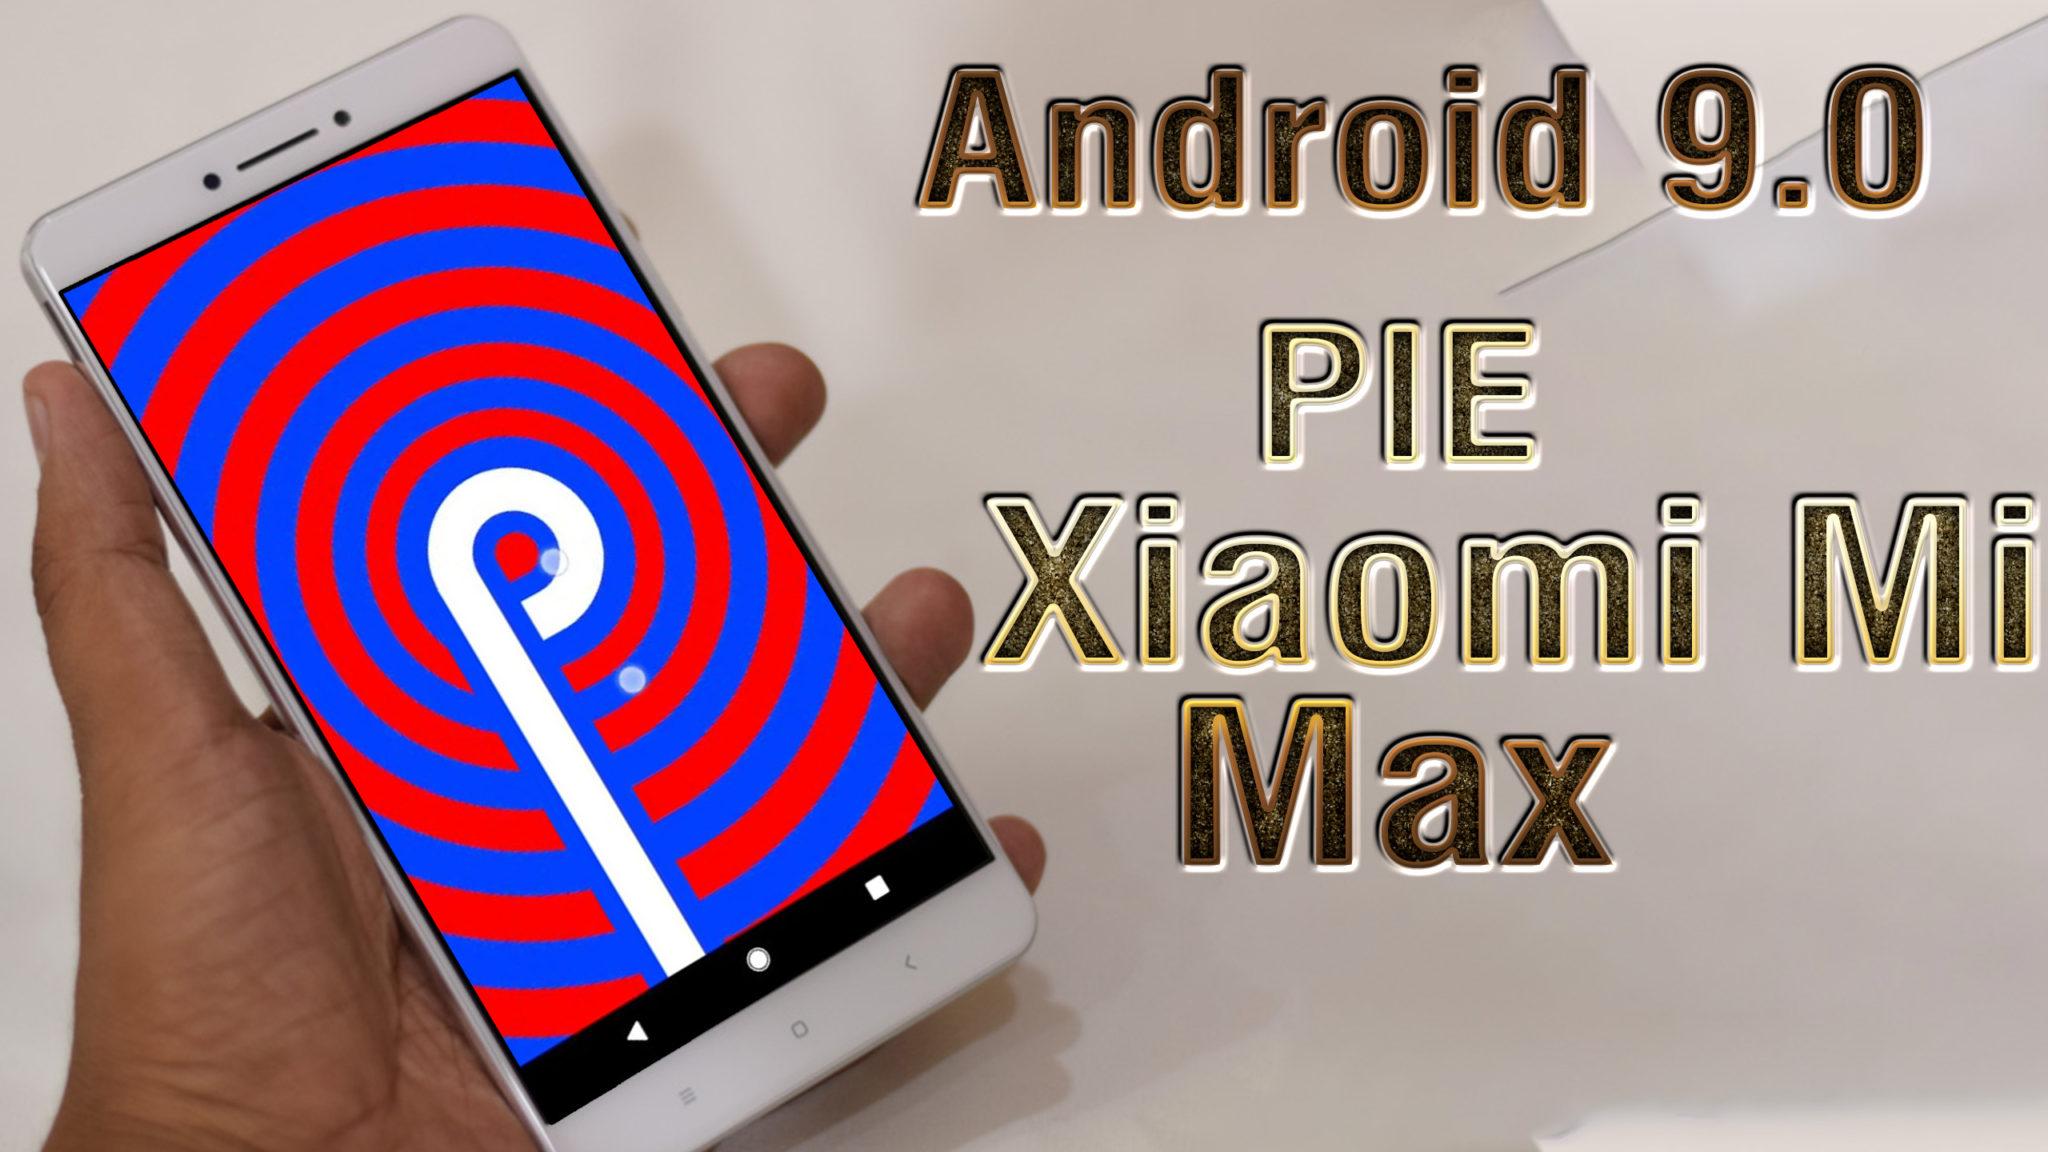 Install Android 90 Pie On Xiaomi Mi Max Resurrection Remix How To Guide The Upgrade Guide 2881